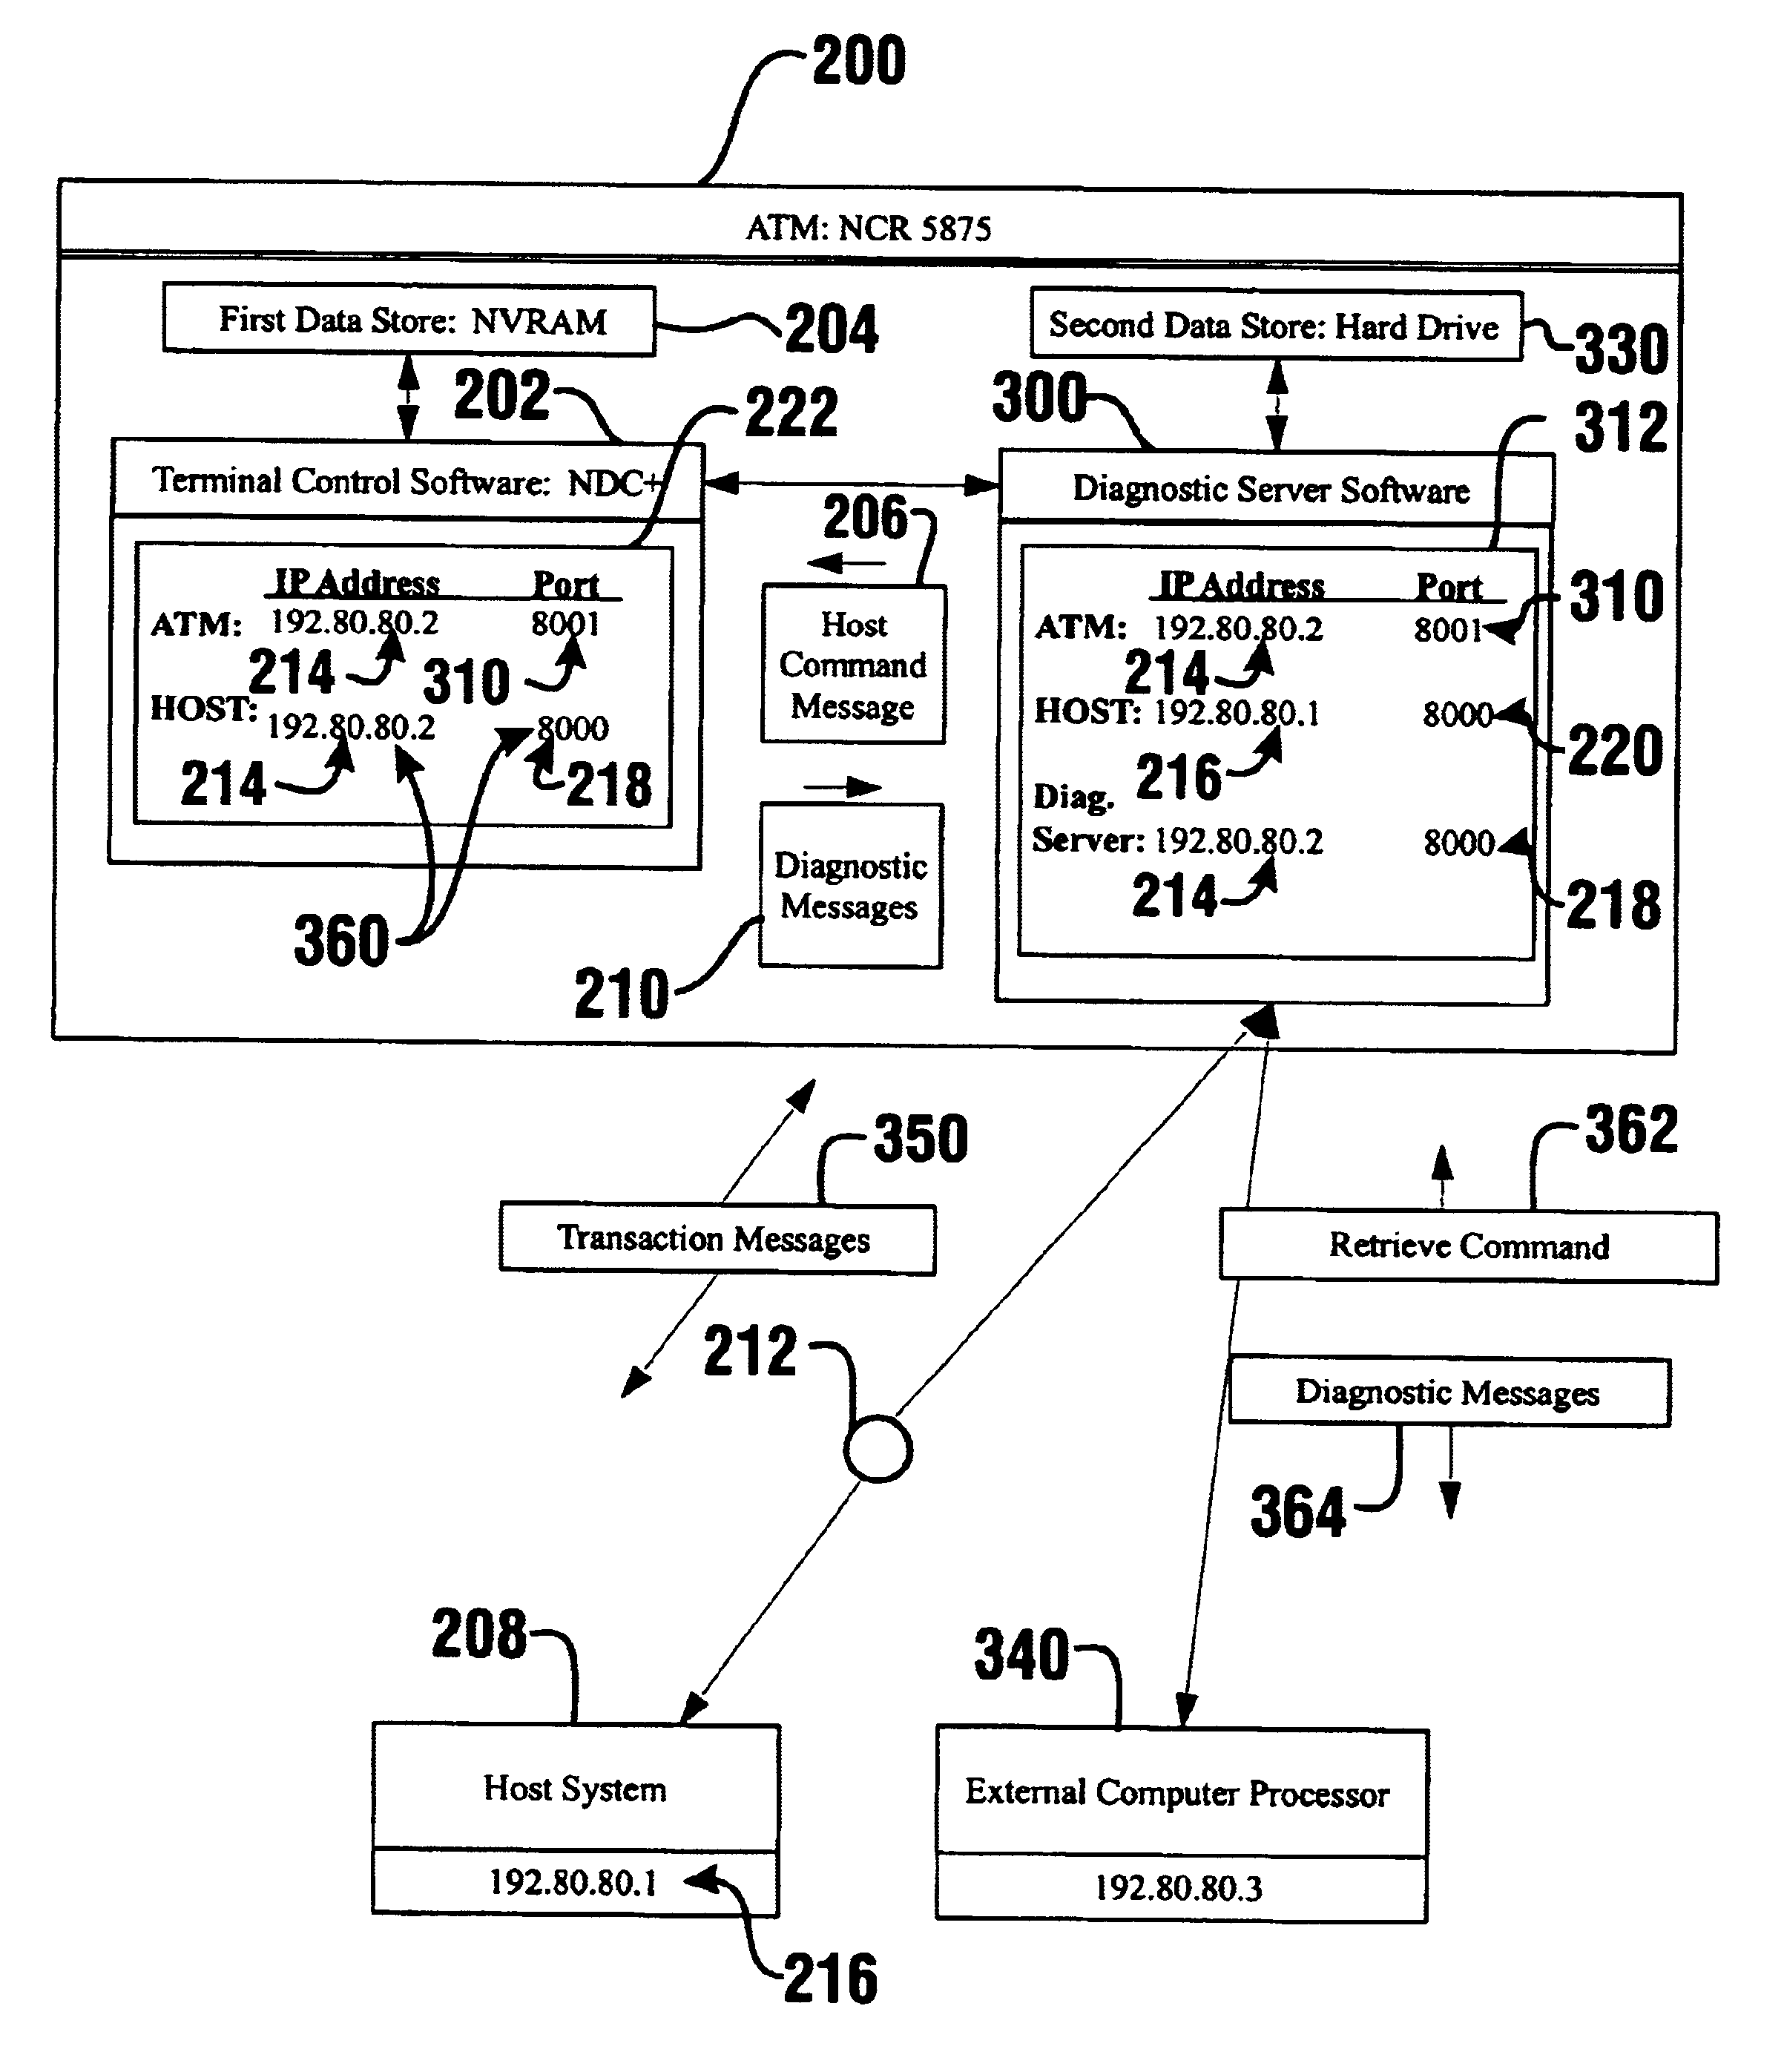 Automated banking machine diagnostic system and method